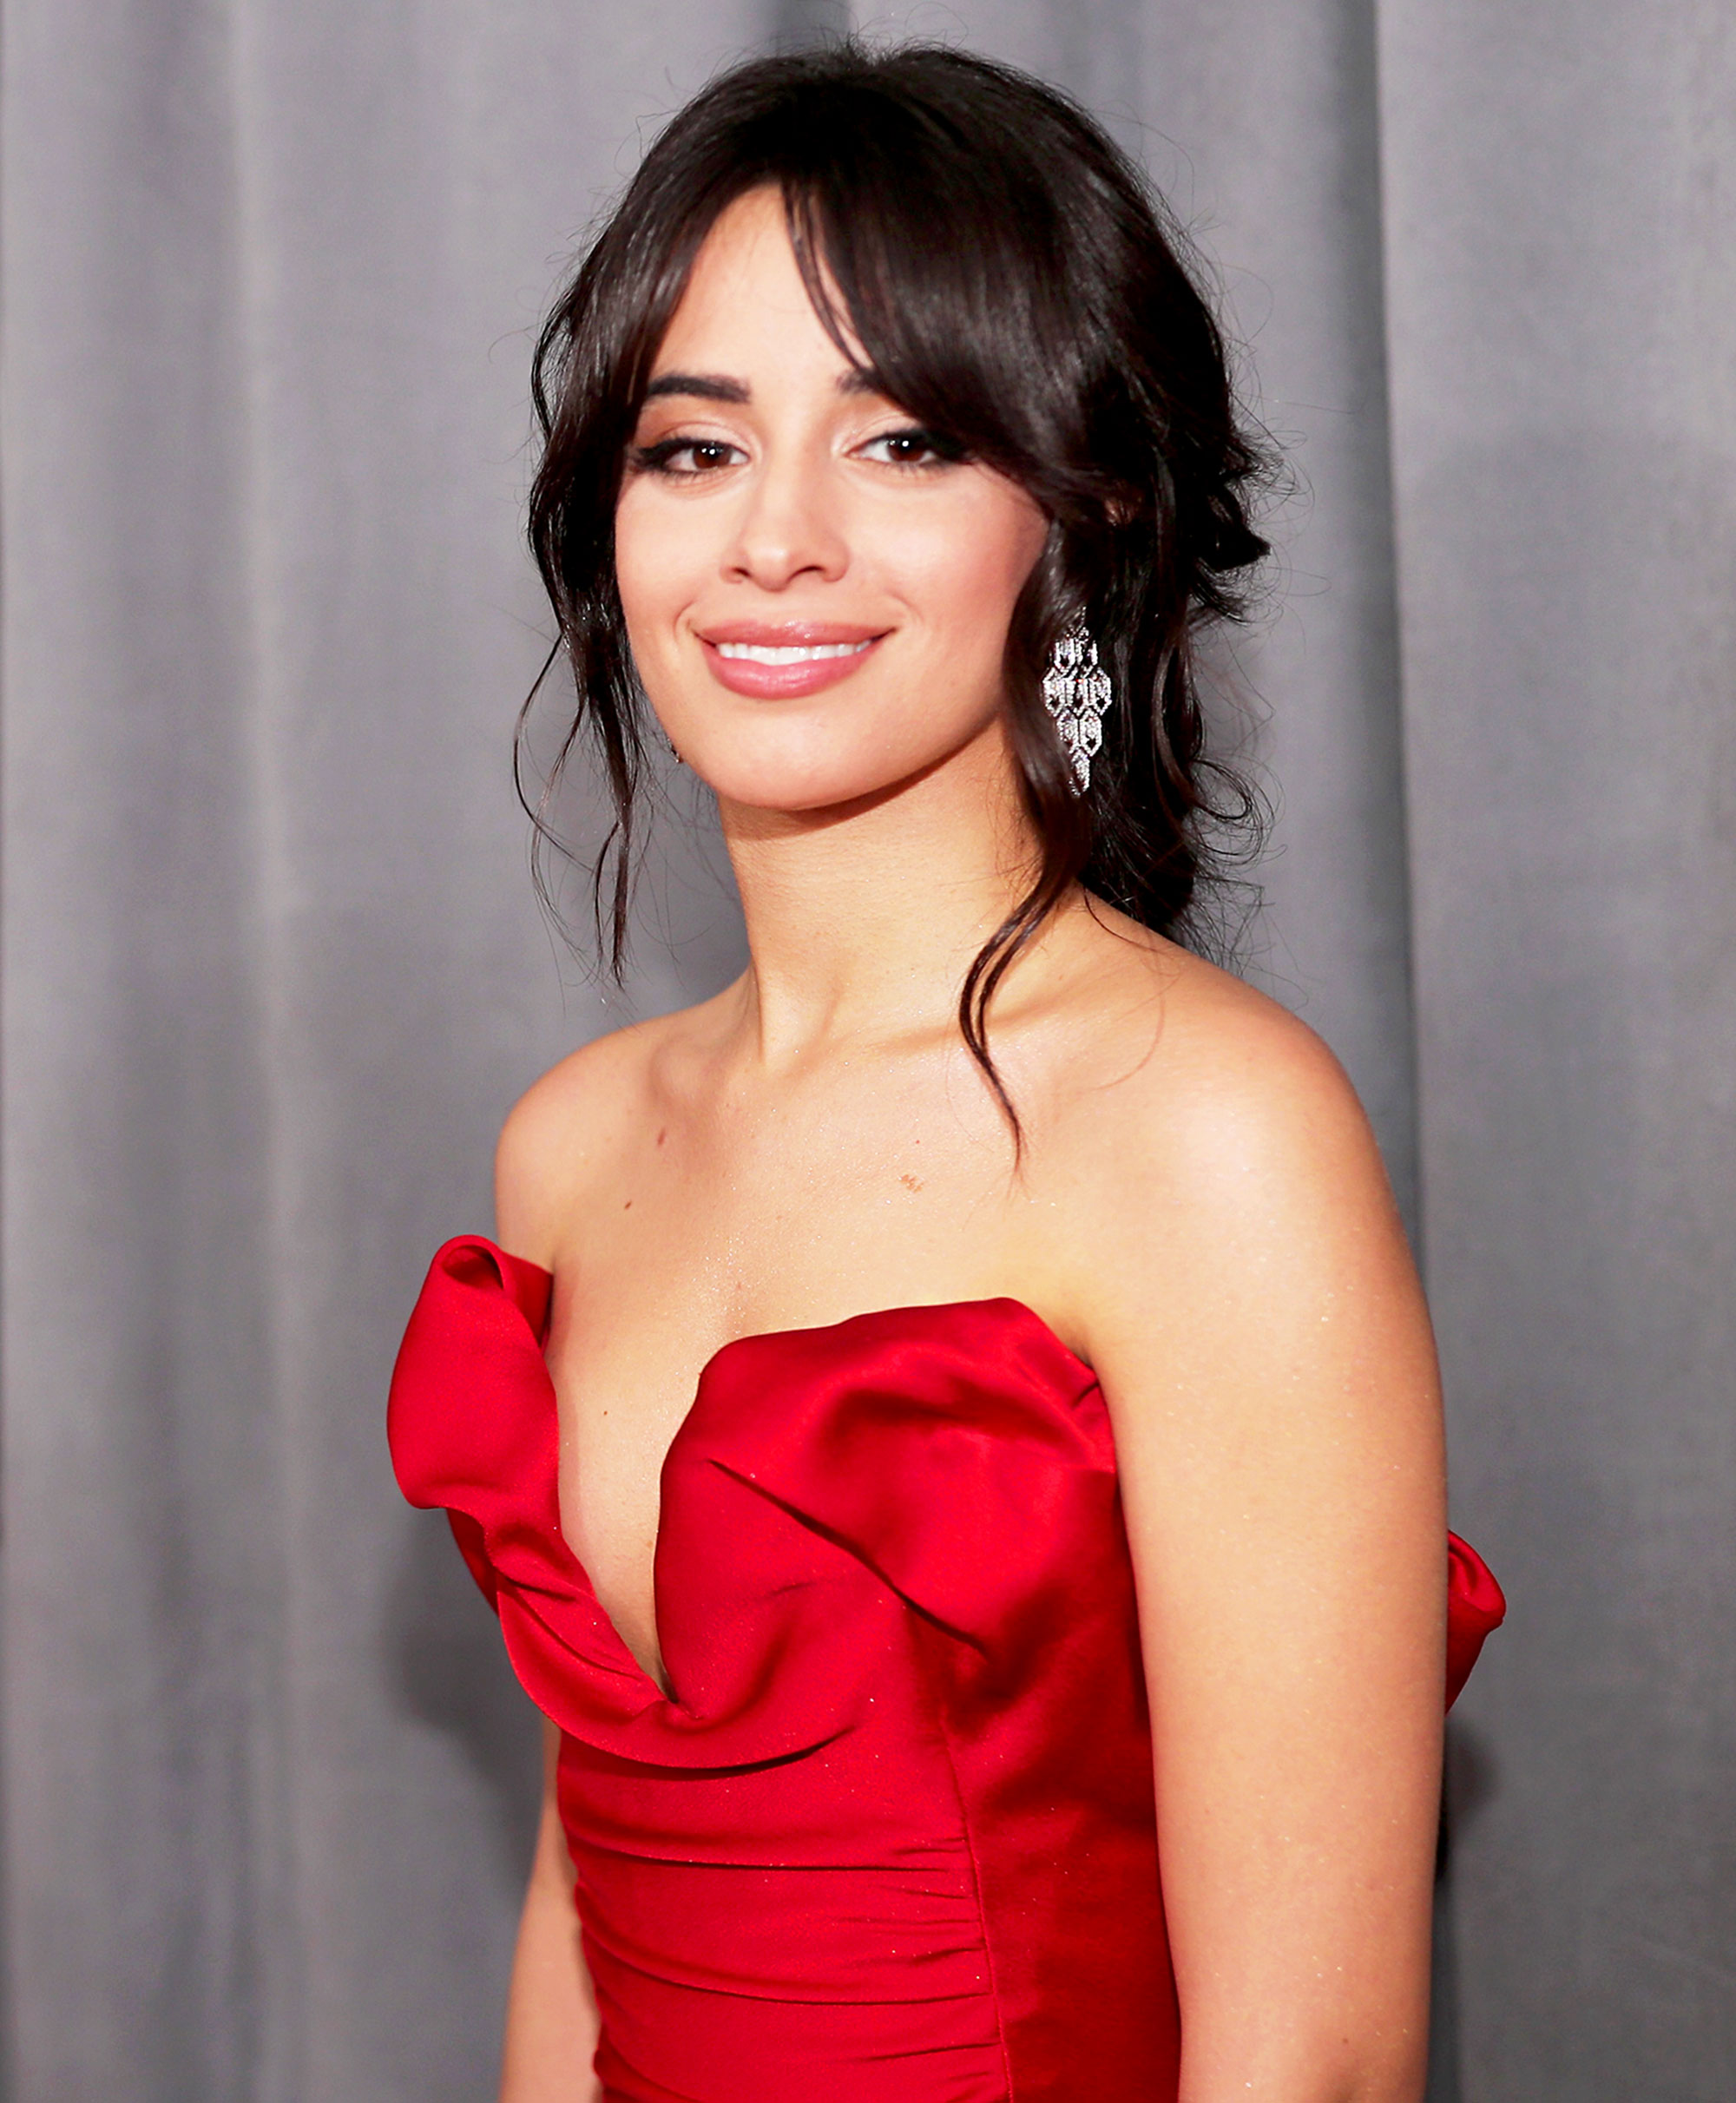 Grammy Awards 2018: Camila Cabello Delivers Old Hollywood Glamour